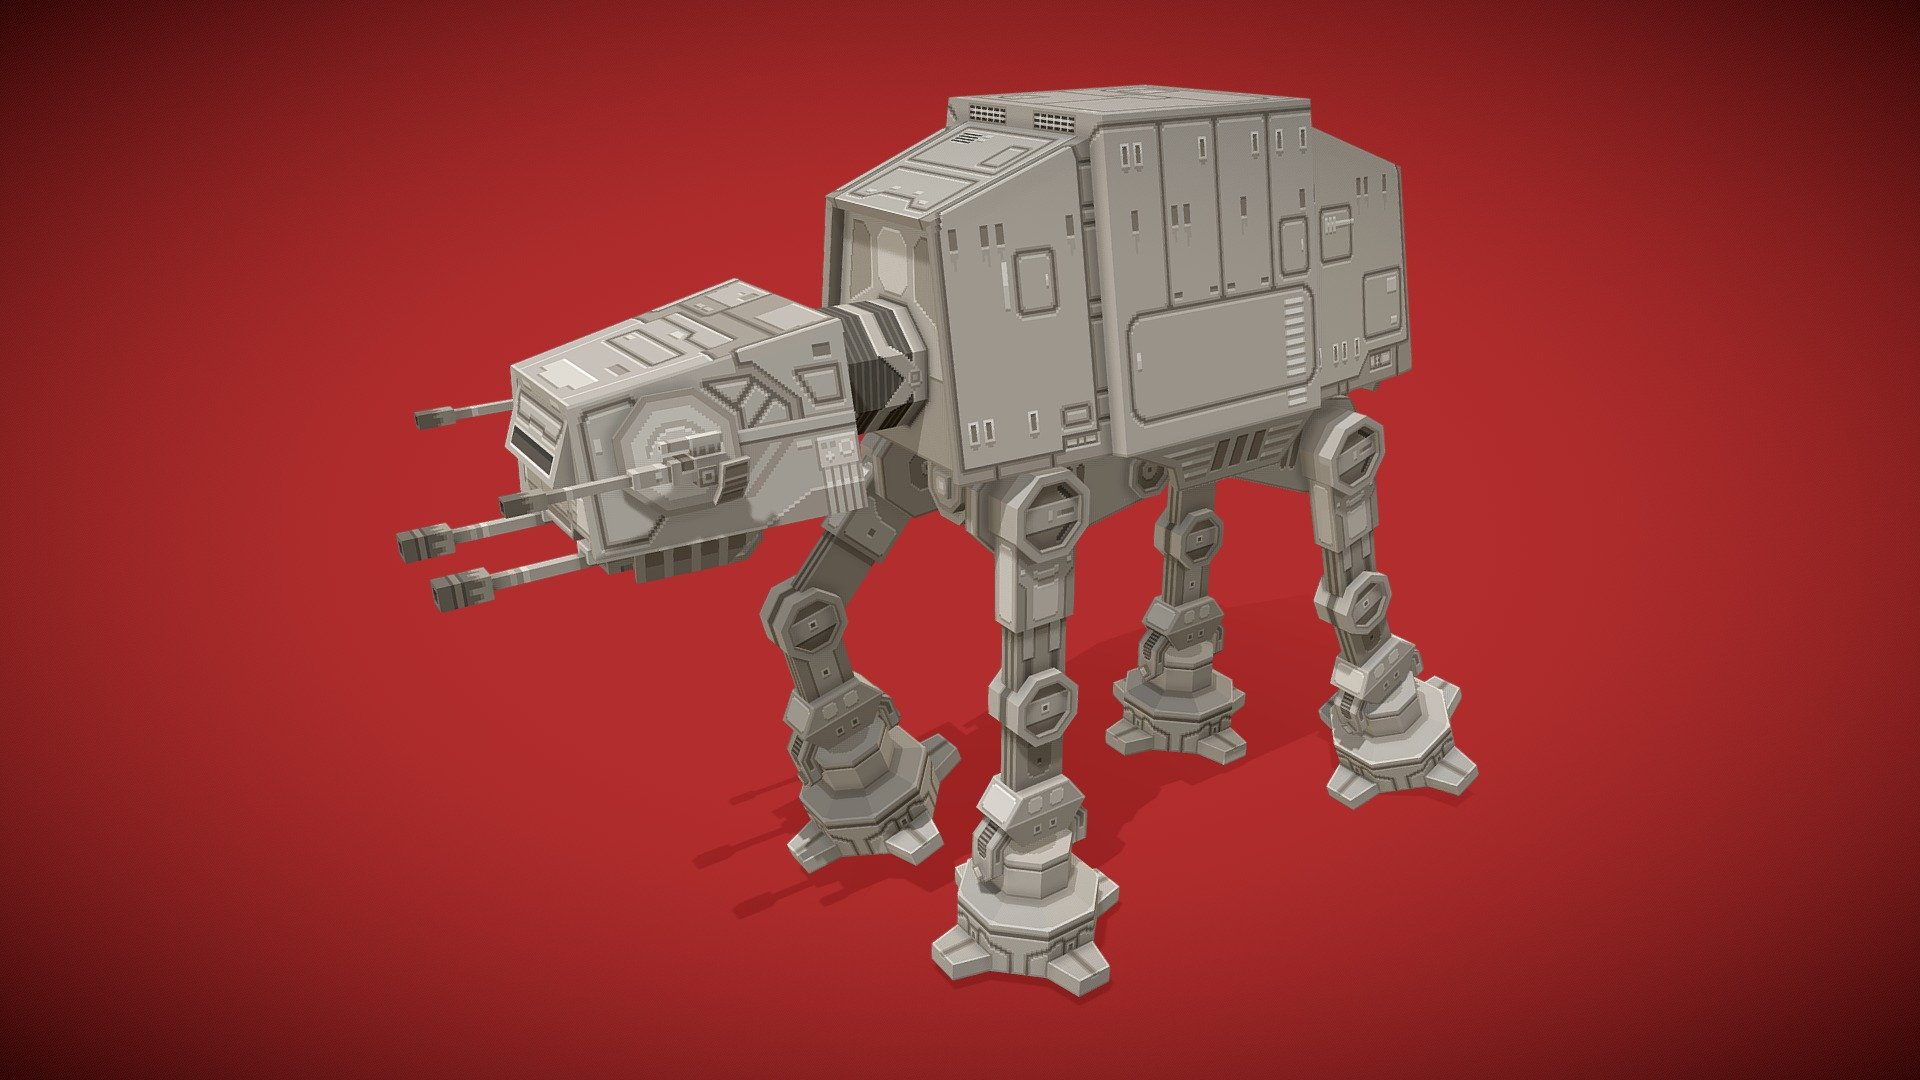 Designed by Vahlgoul and created with Blockbench. Animation by Sultan.

Produced for Karl Jacobs.  [https://www.youtube.com/watch?v=gJzBf5BHZw8&amp;t=5s] - Star Wars | AT-AT - 3D model by V-Artistry (@Vahlgoul) 3d model